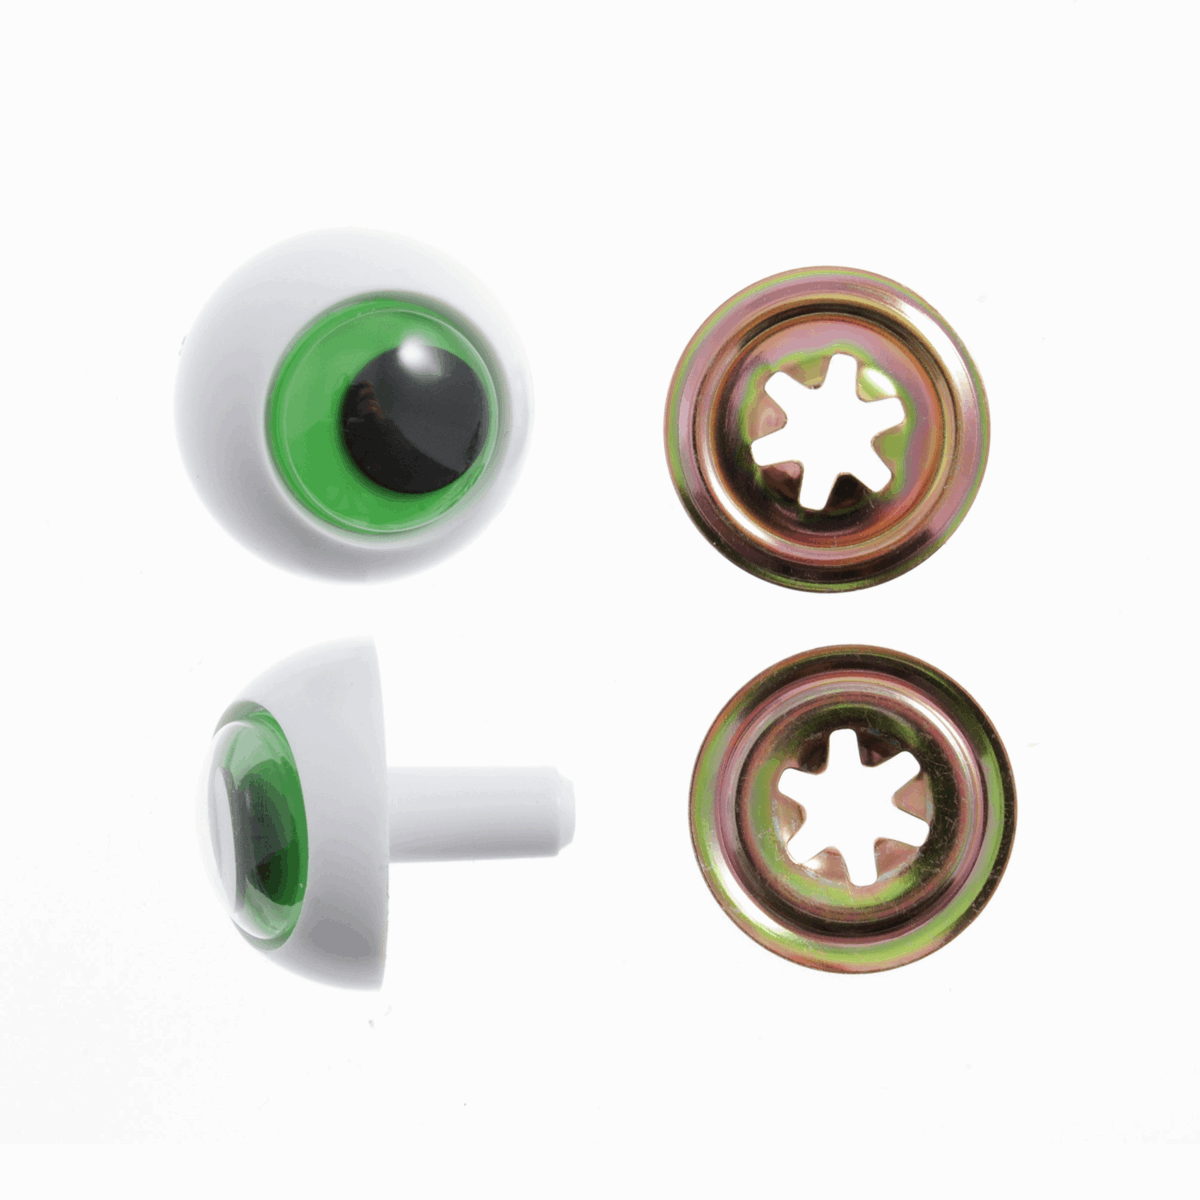 Trimits Toy Eyes - Frogs 16mm (Pack of 2)